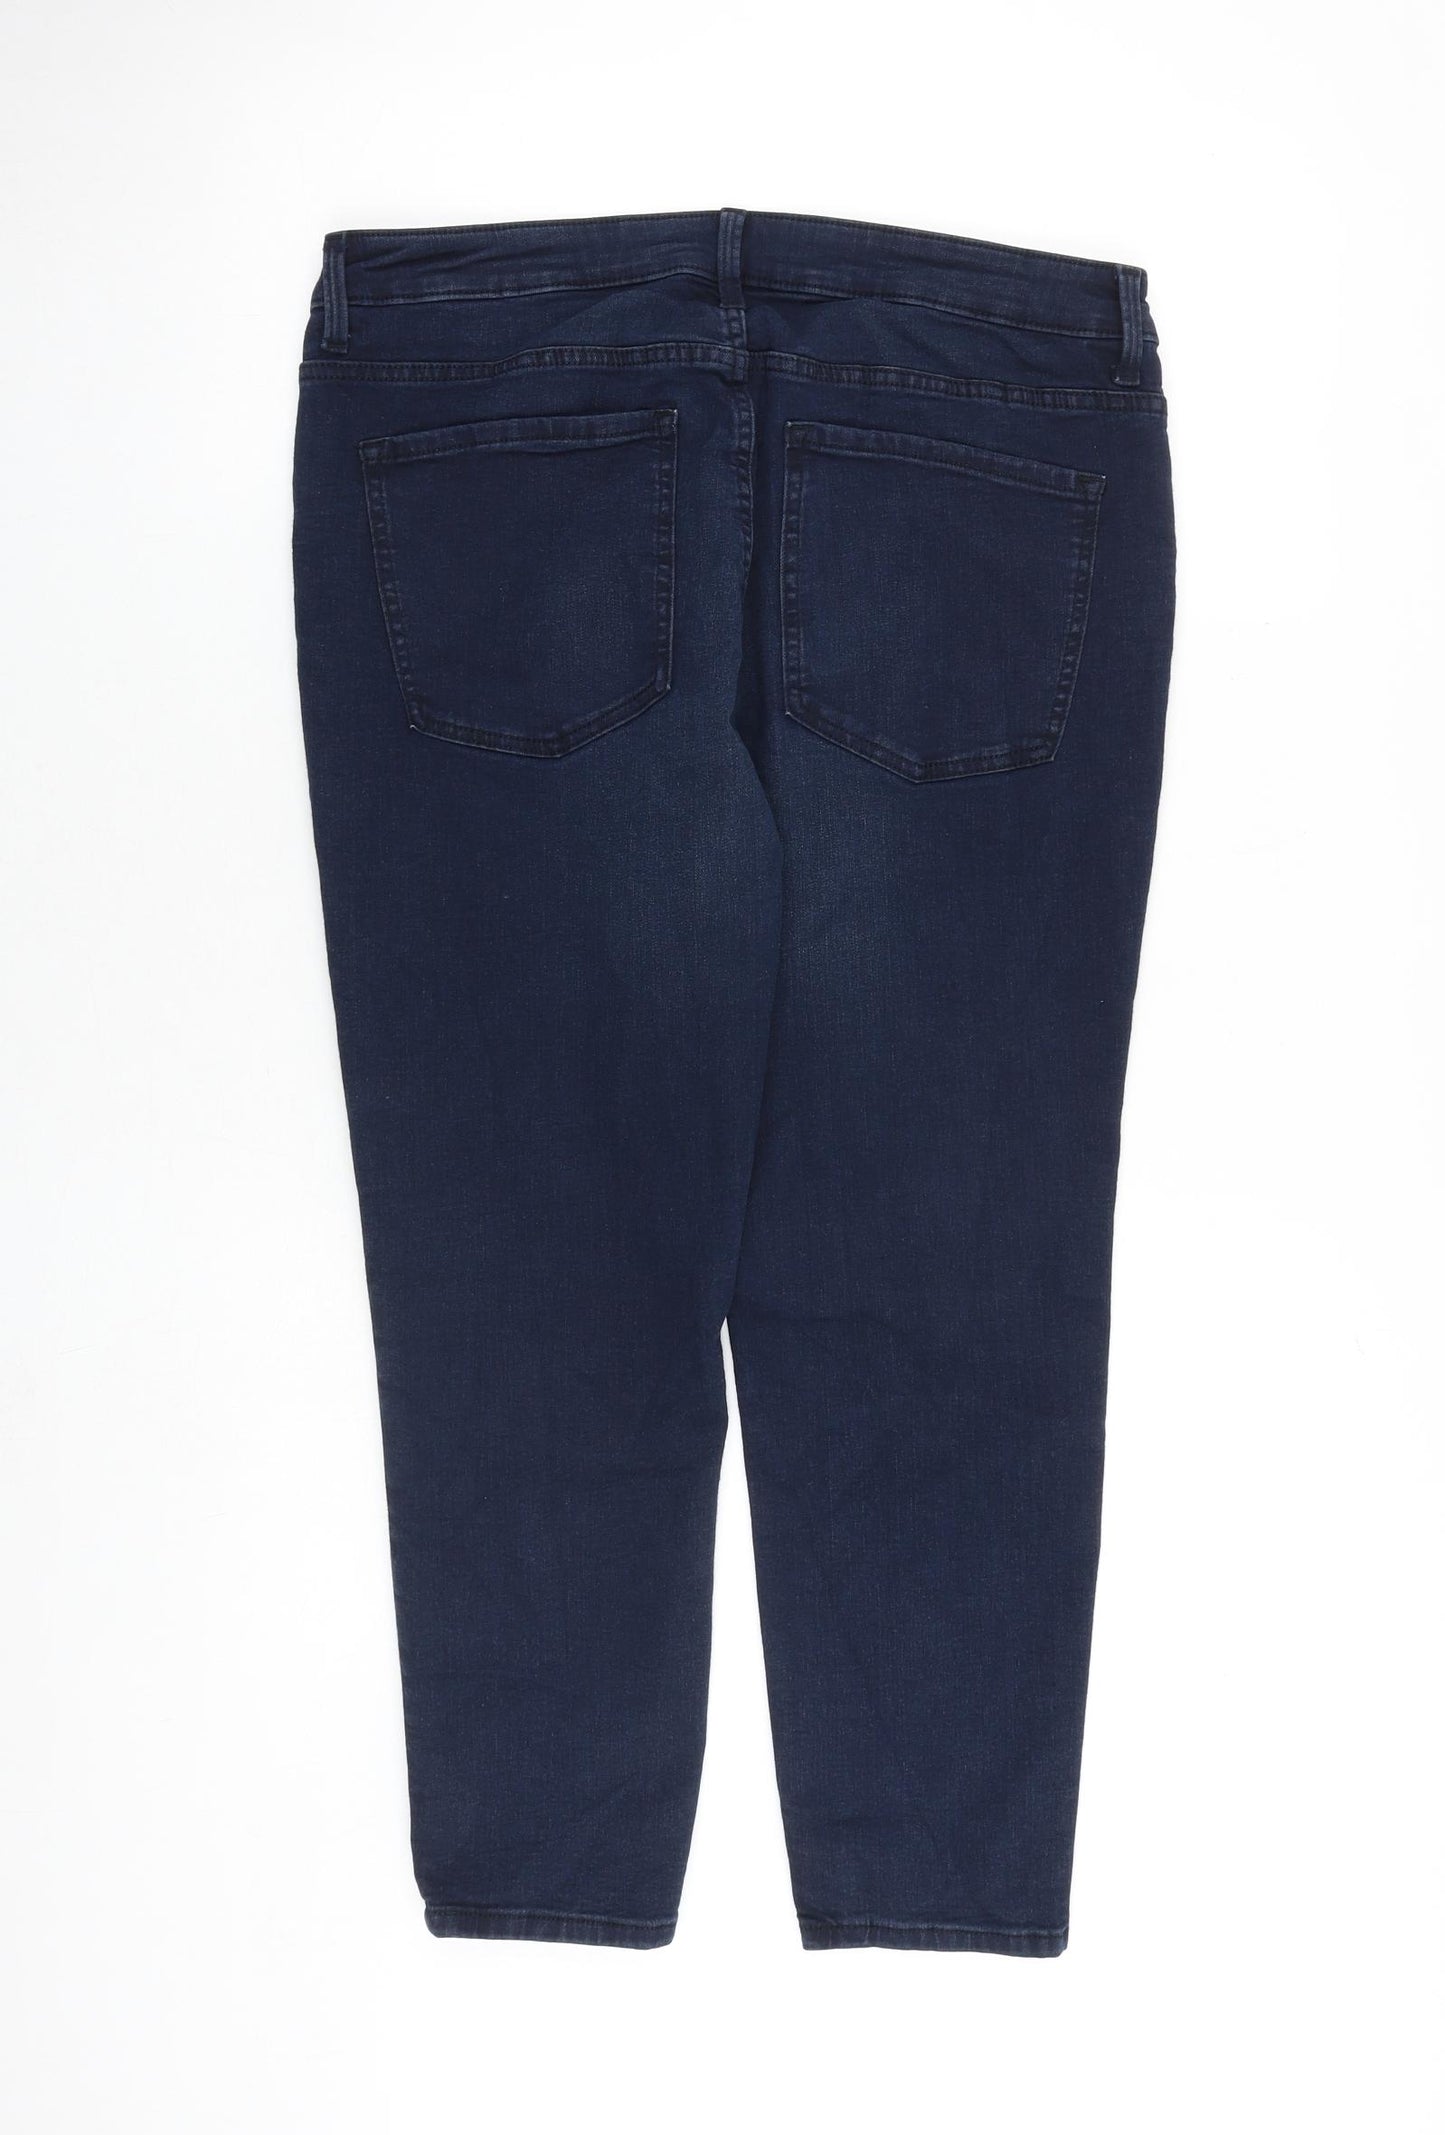 Marks and Spencer Womens Blue Cotton Skinny Jeans Size 16 L27 in Slim Zip